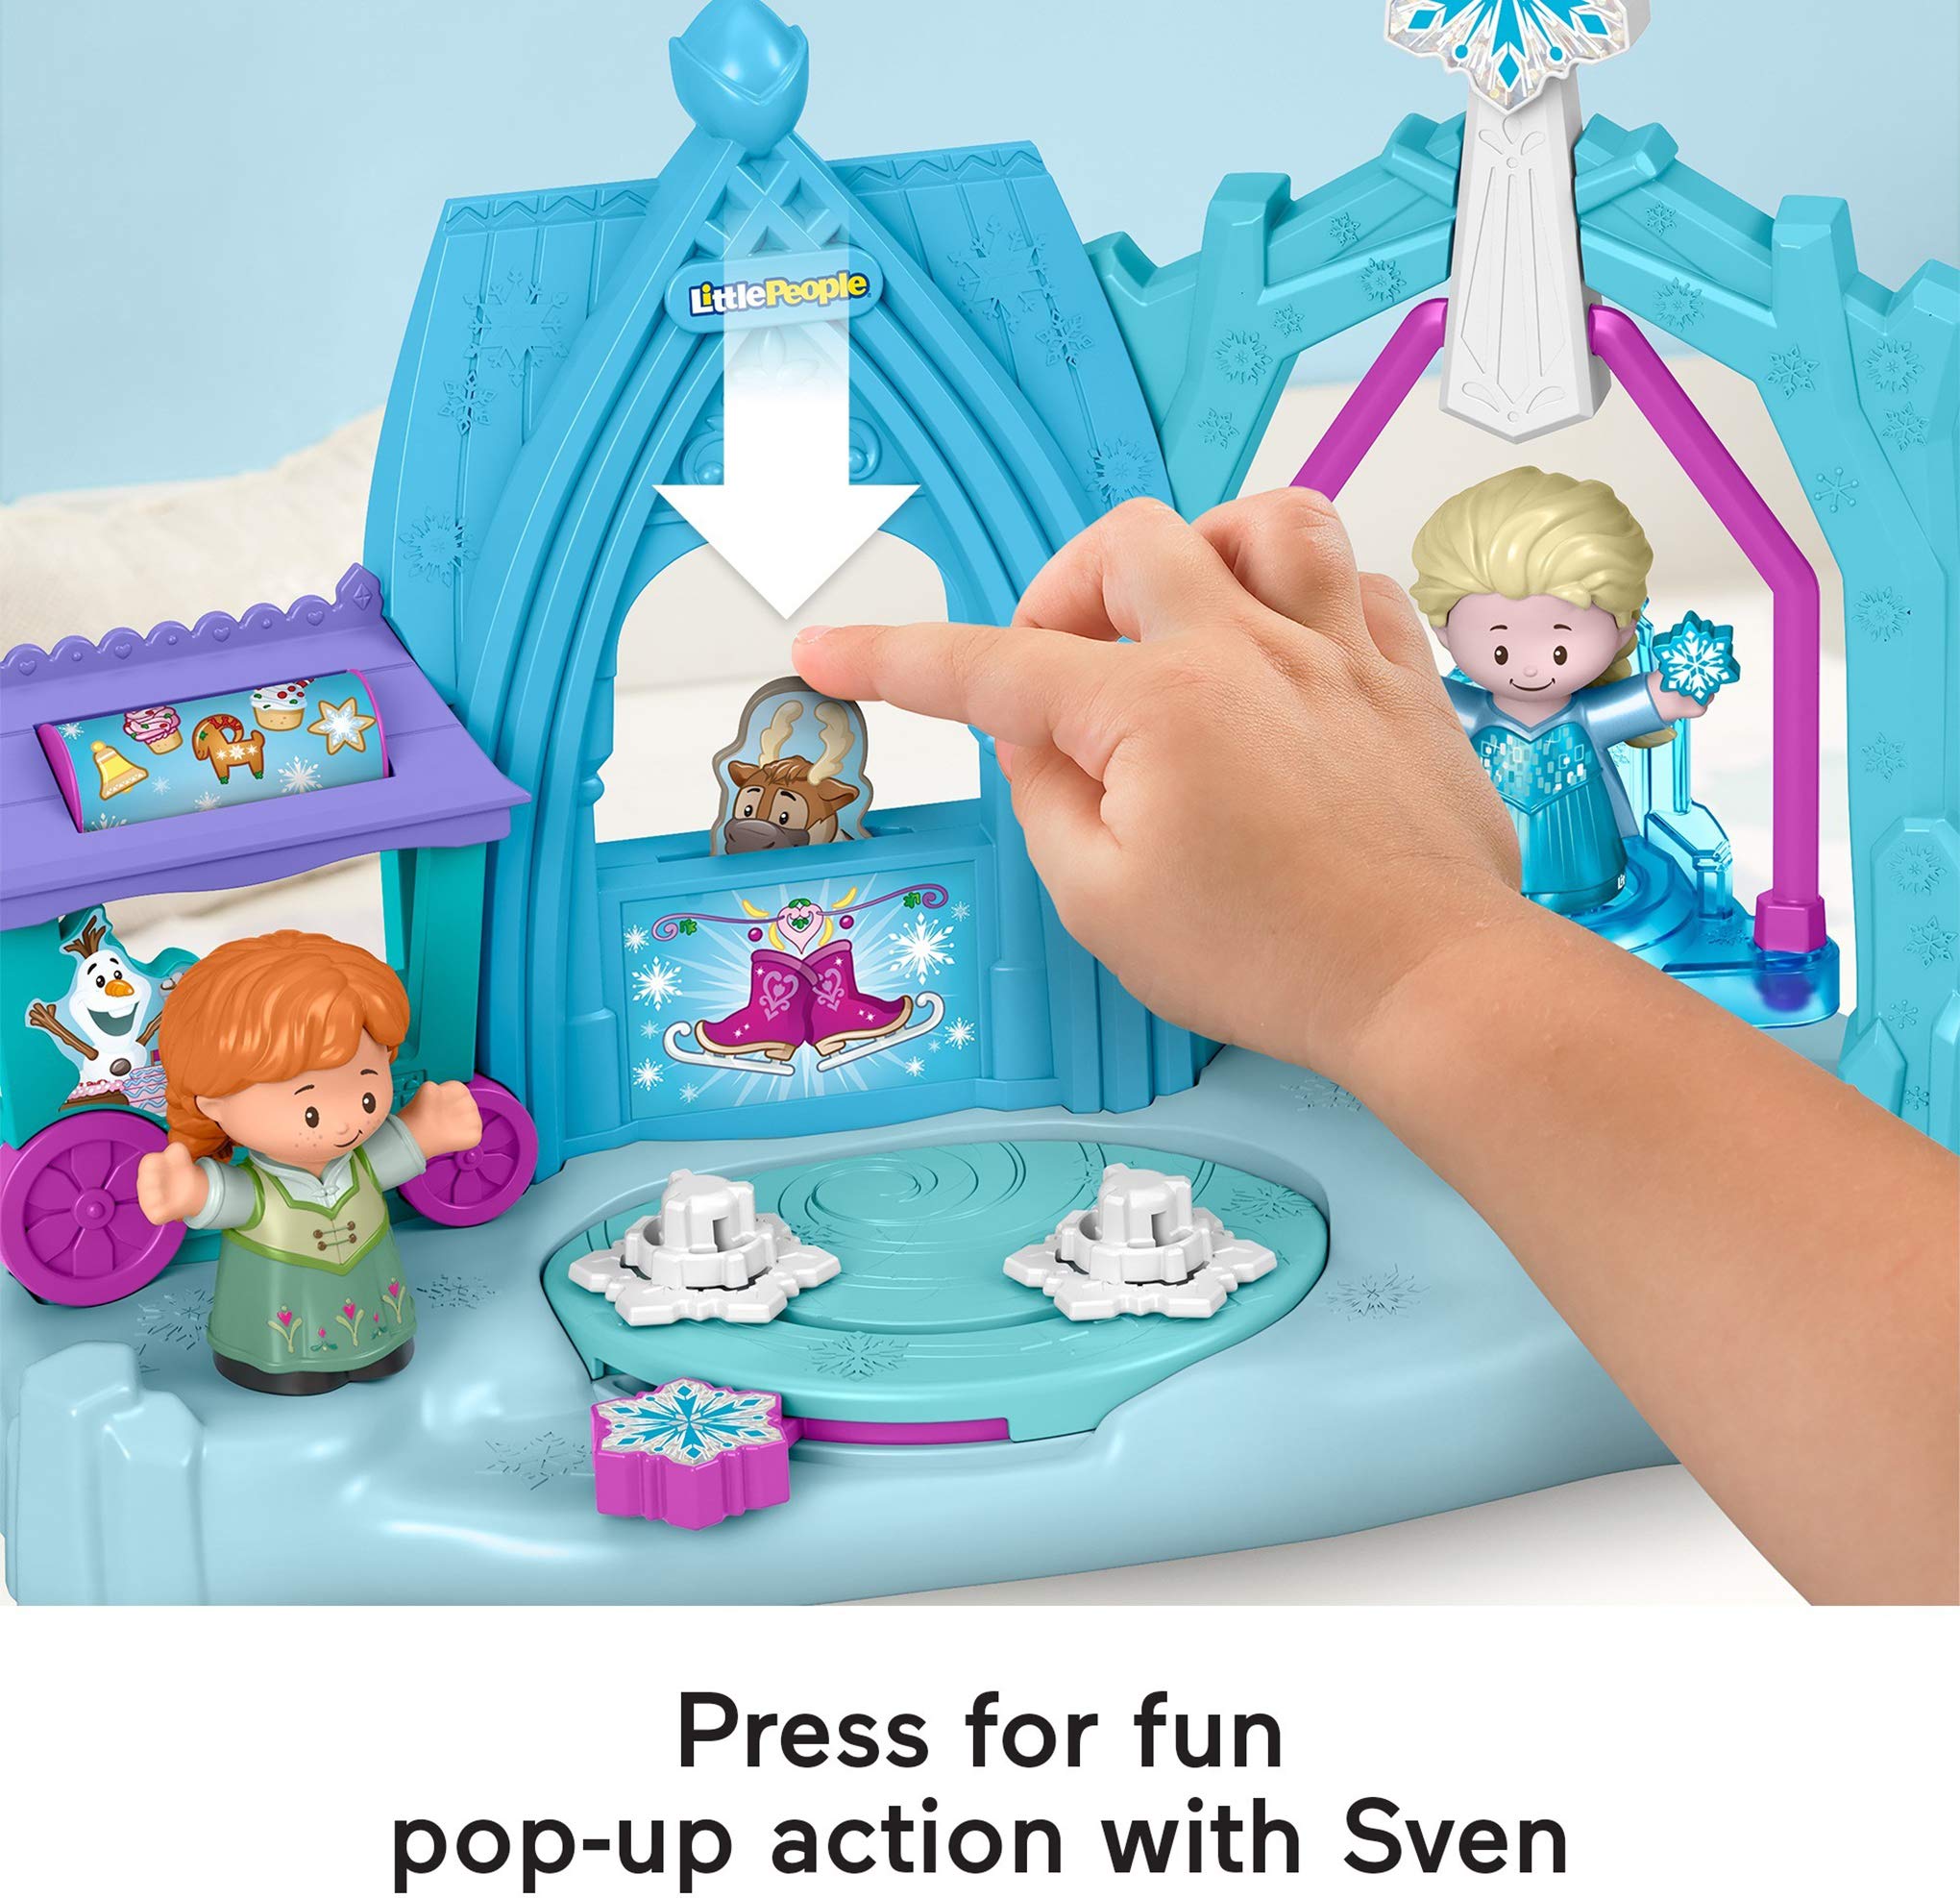 Fisher-Price Disney Frozen Arendelle Winter Wonderland by Little People, ice skating playset with Anna and Elsa figures for toddlers and preschool kids